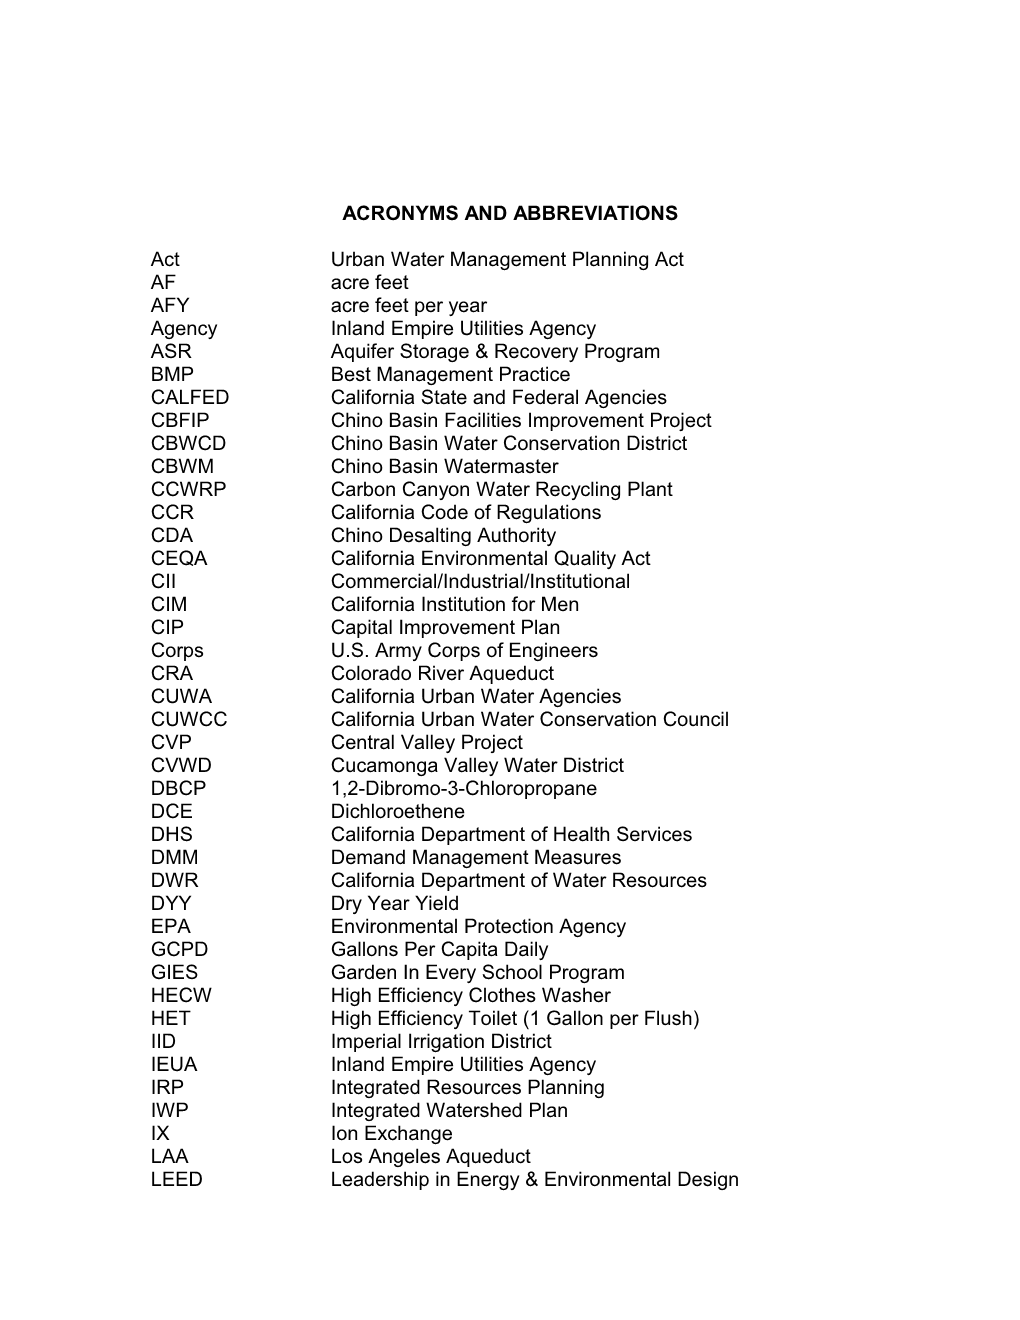 Acrononyms and Abbreviations